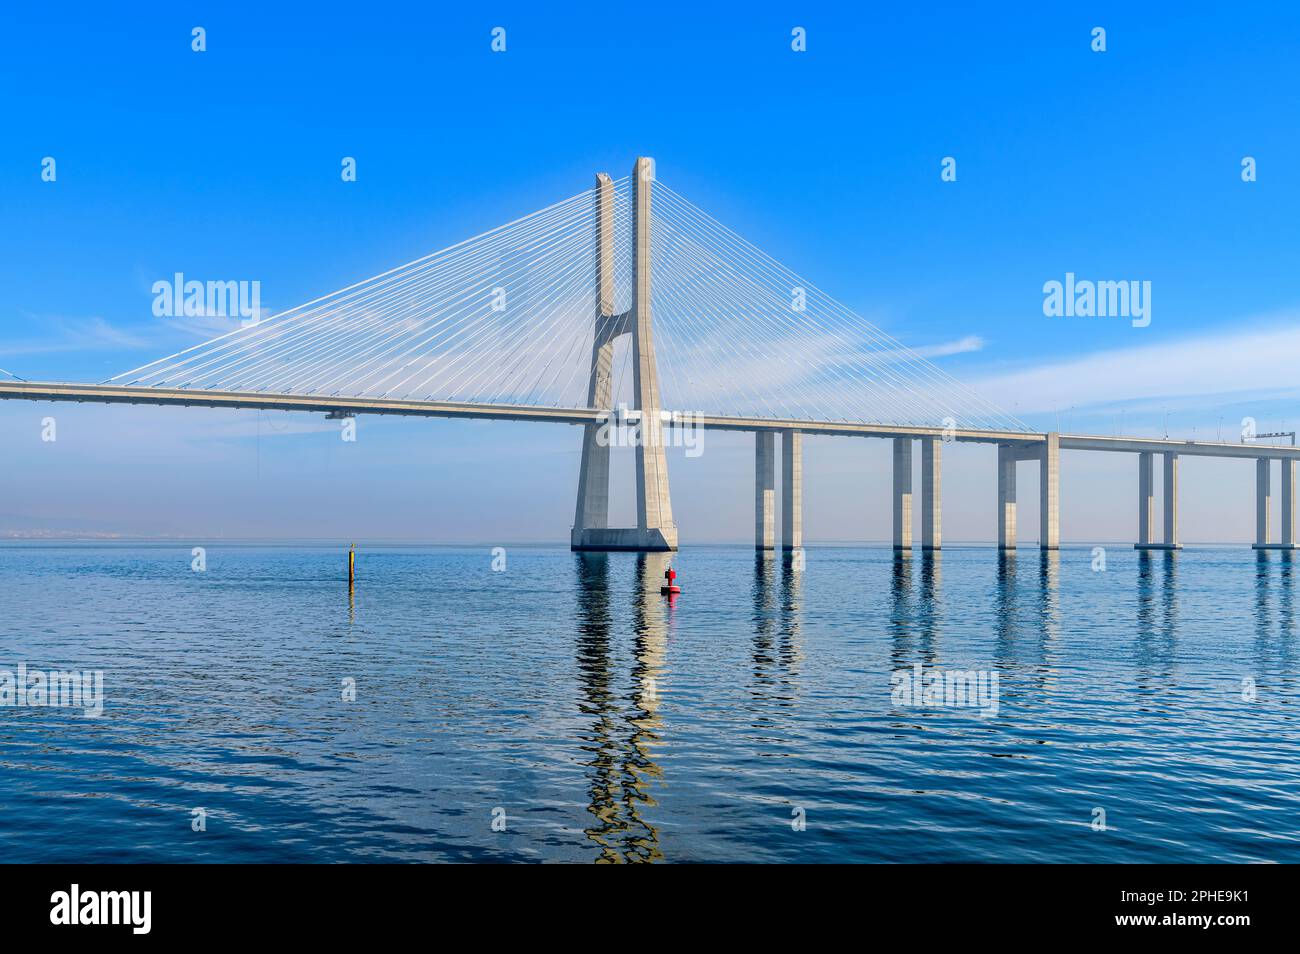 Vasco da Gama Bridge - a cable-stayed bridge with viaducts on either side. Spans the Tagus River in Lisbon. Currently the longest bridge in the EU. Stock Photo